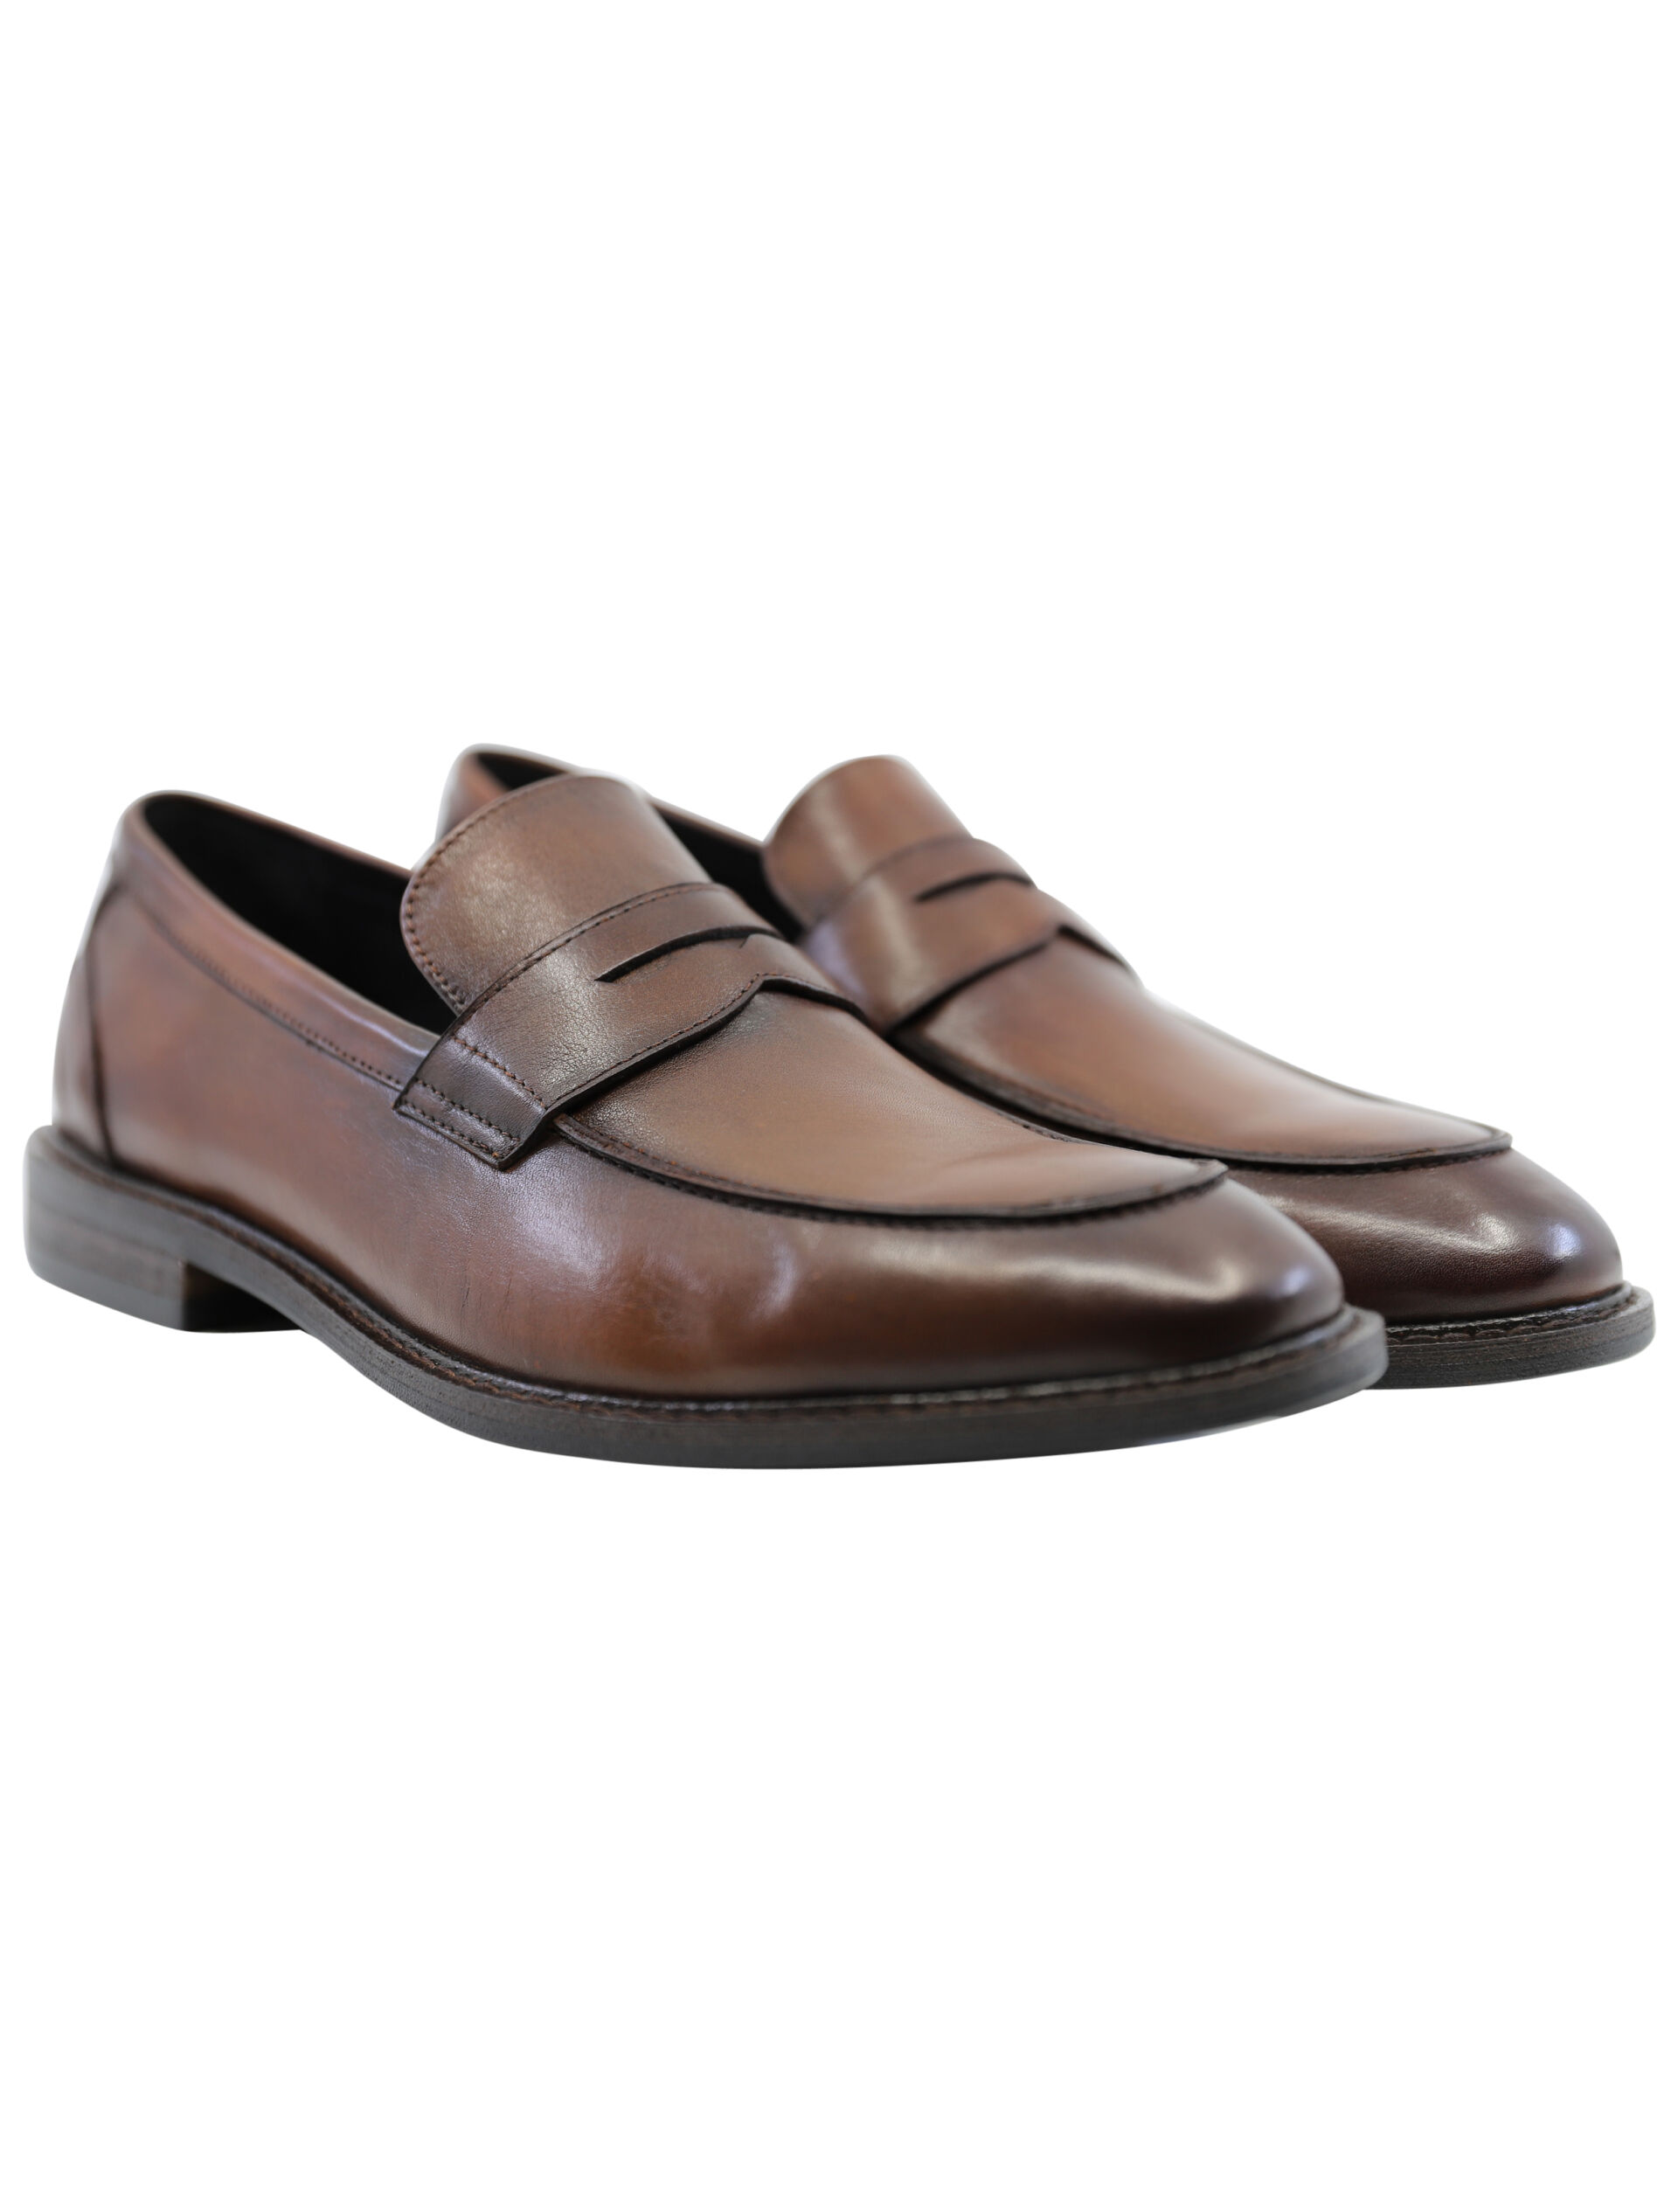 Business shoes Business shoes Brown 30-992032